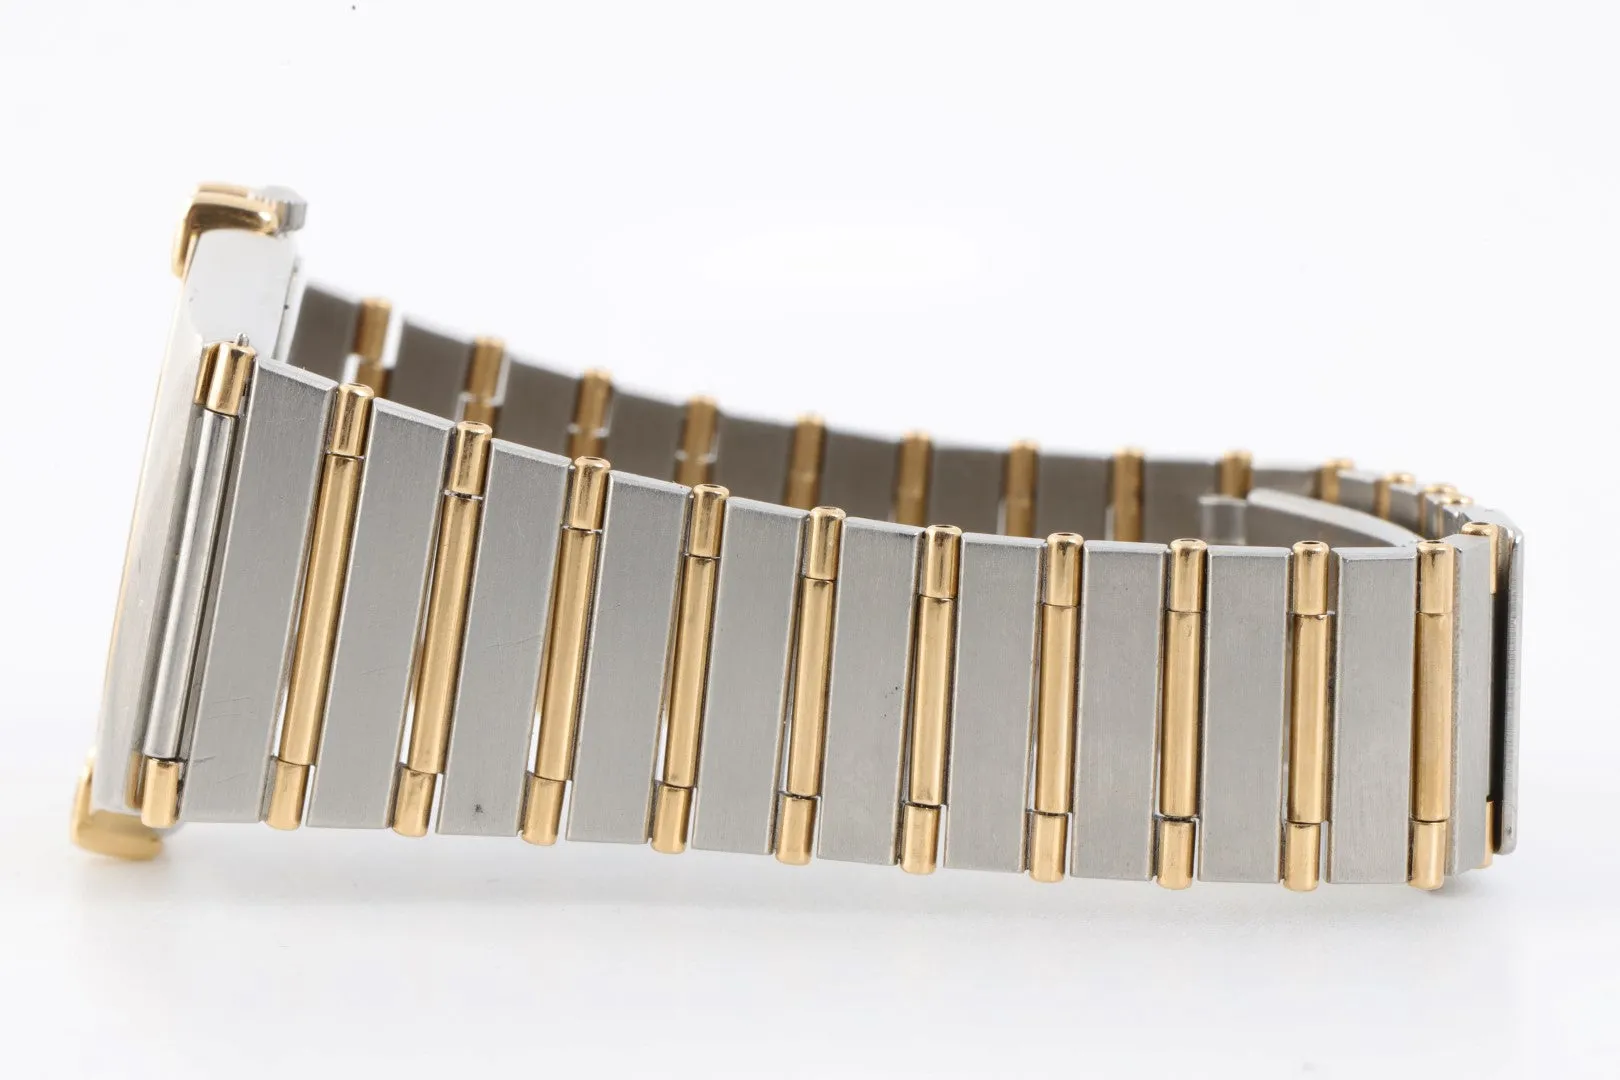 Omega Constellation 396.1070 33mm Stainless steel 3